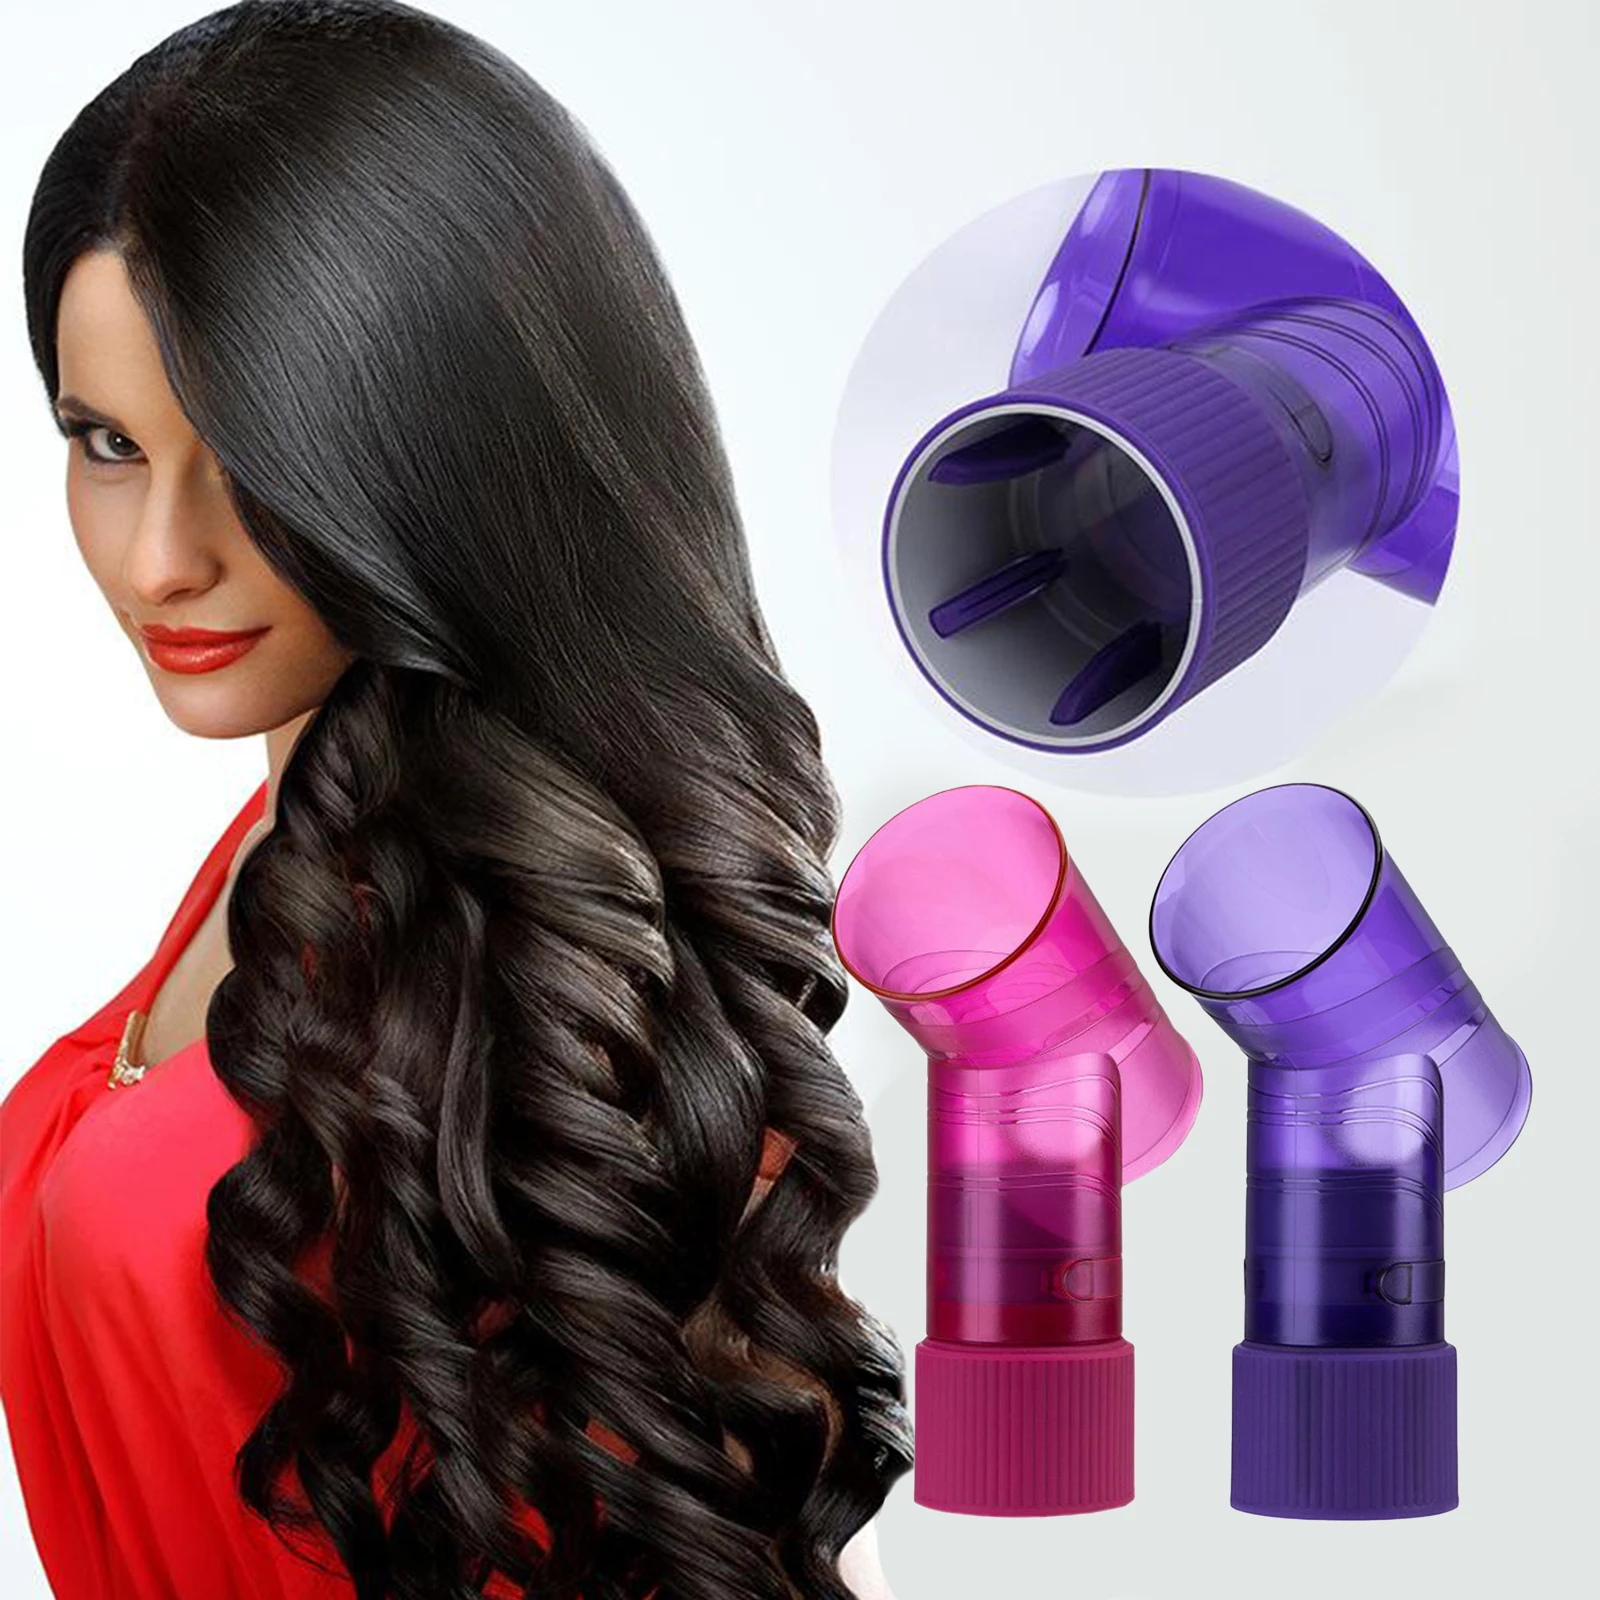 Women Plastic Hair Dryer Curl Diffuser Wind Spin Hair Roller Drying Cap  Styling Tool Attachment|Styling Accessories| - AliExpress